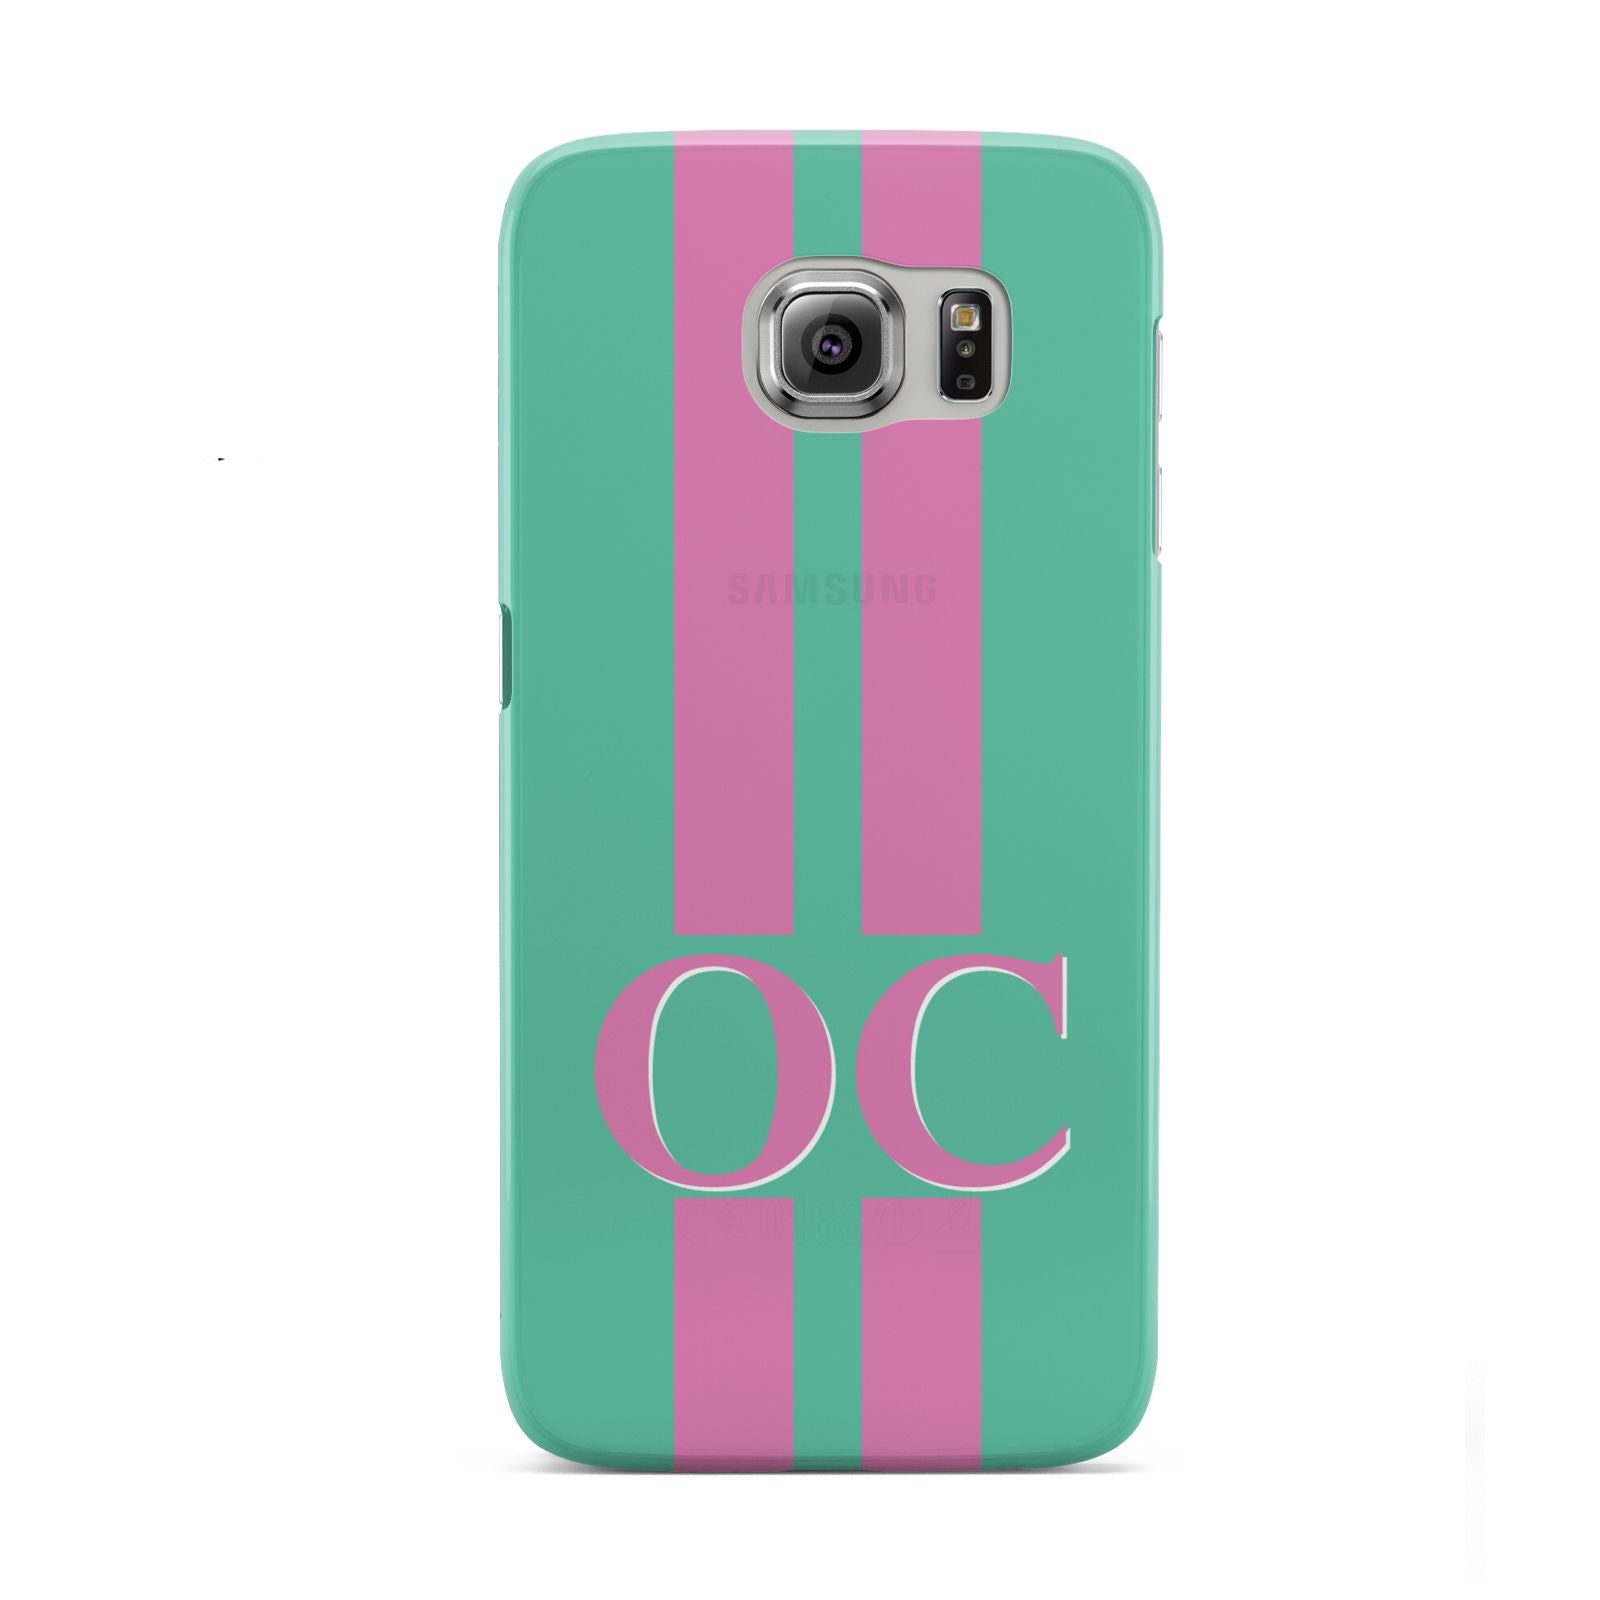 Green Personalised Initials Samsung Galaxy S6 Case